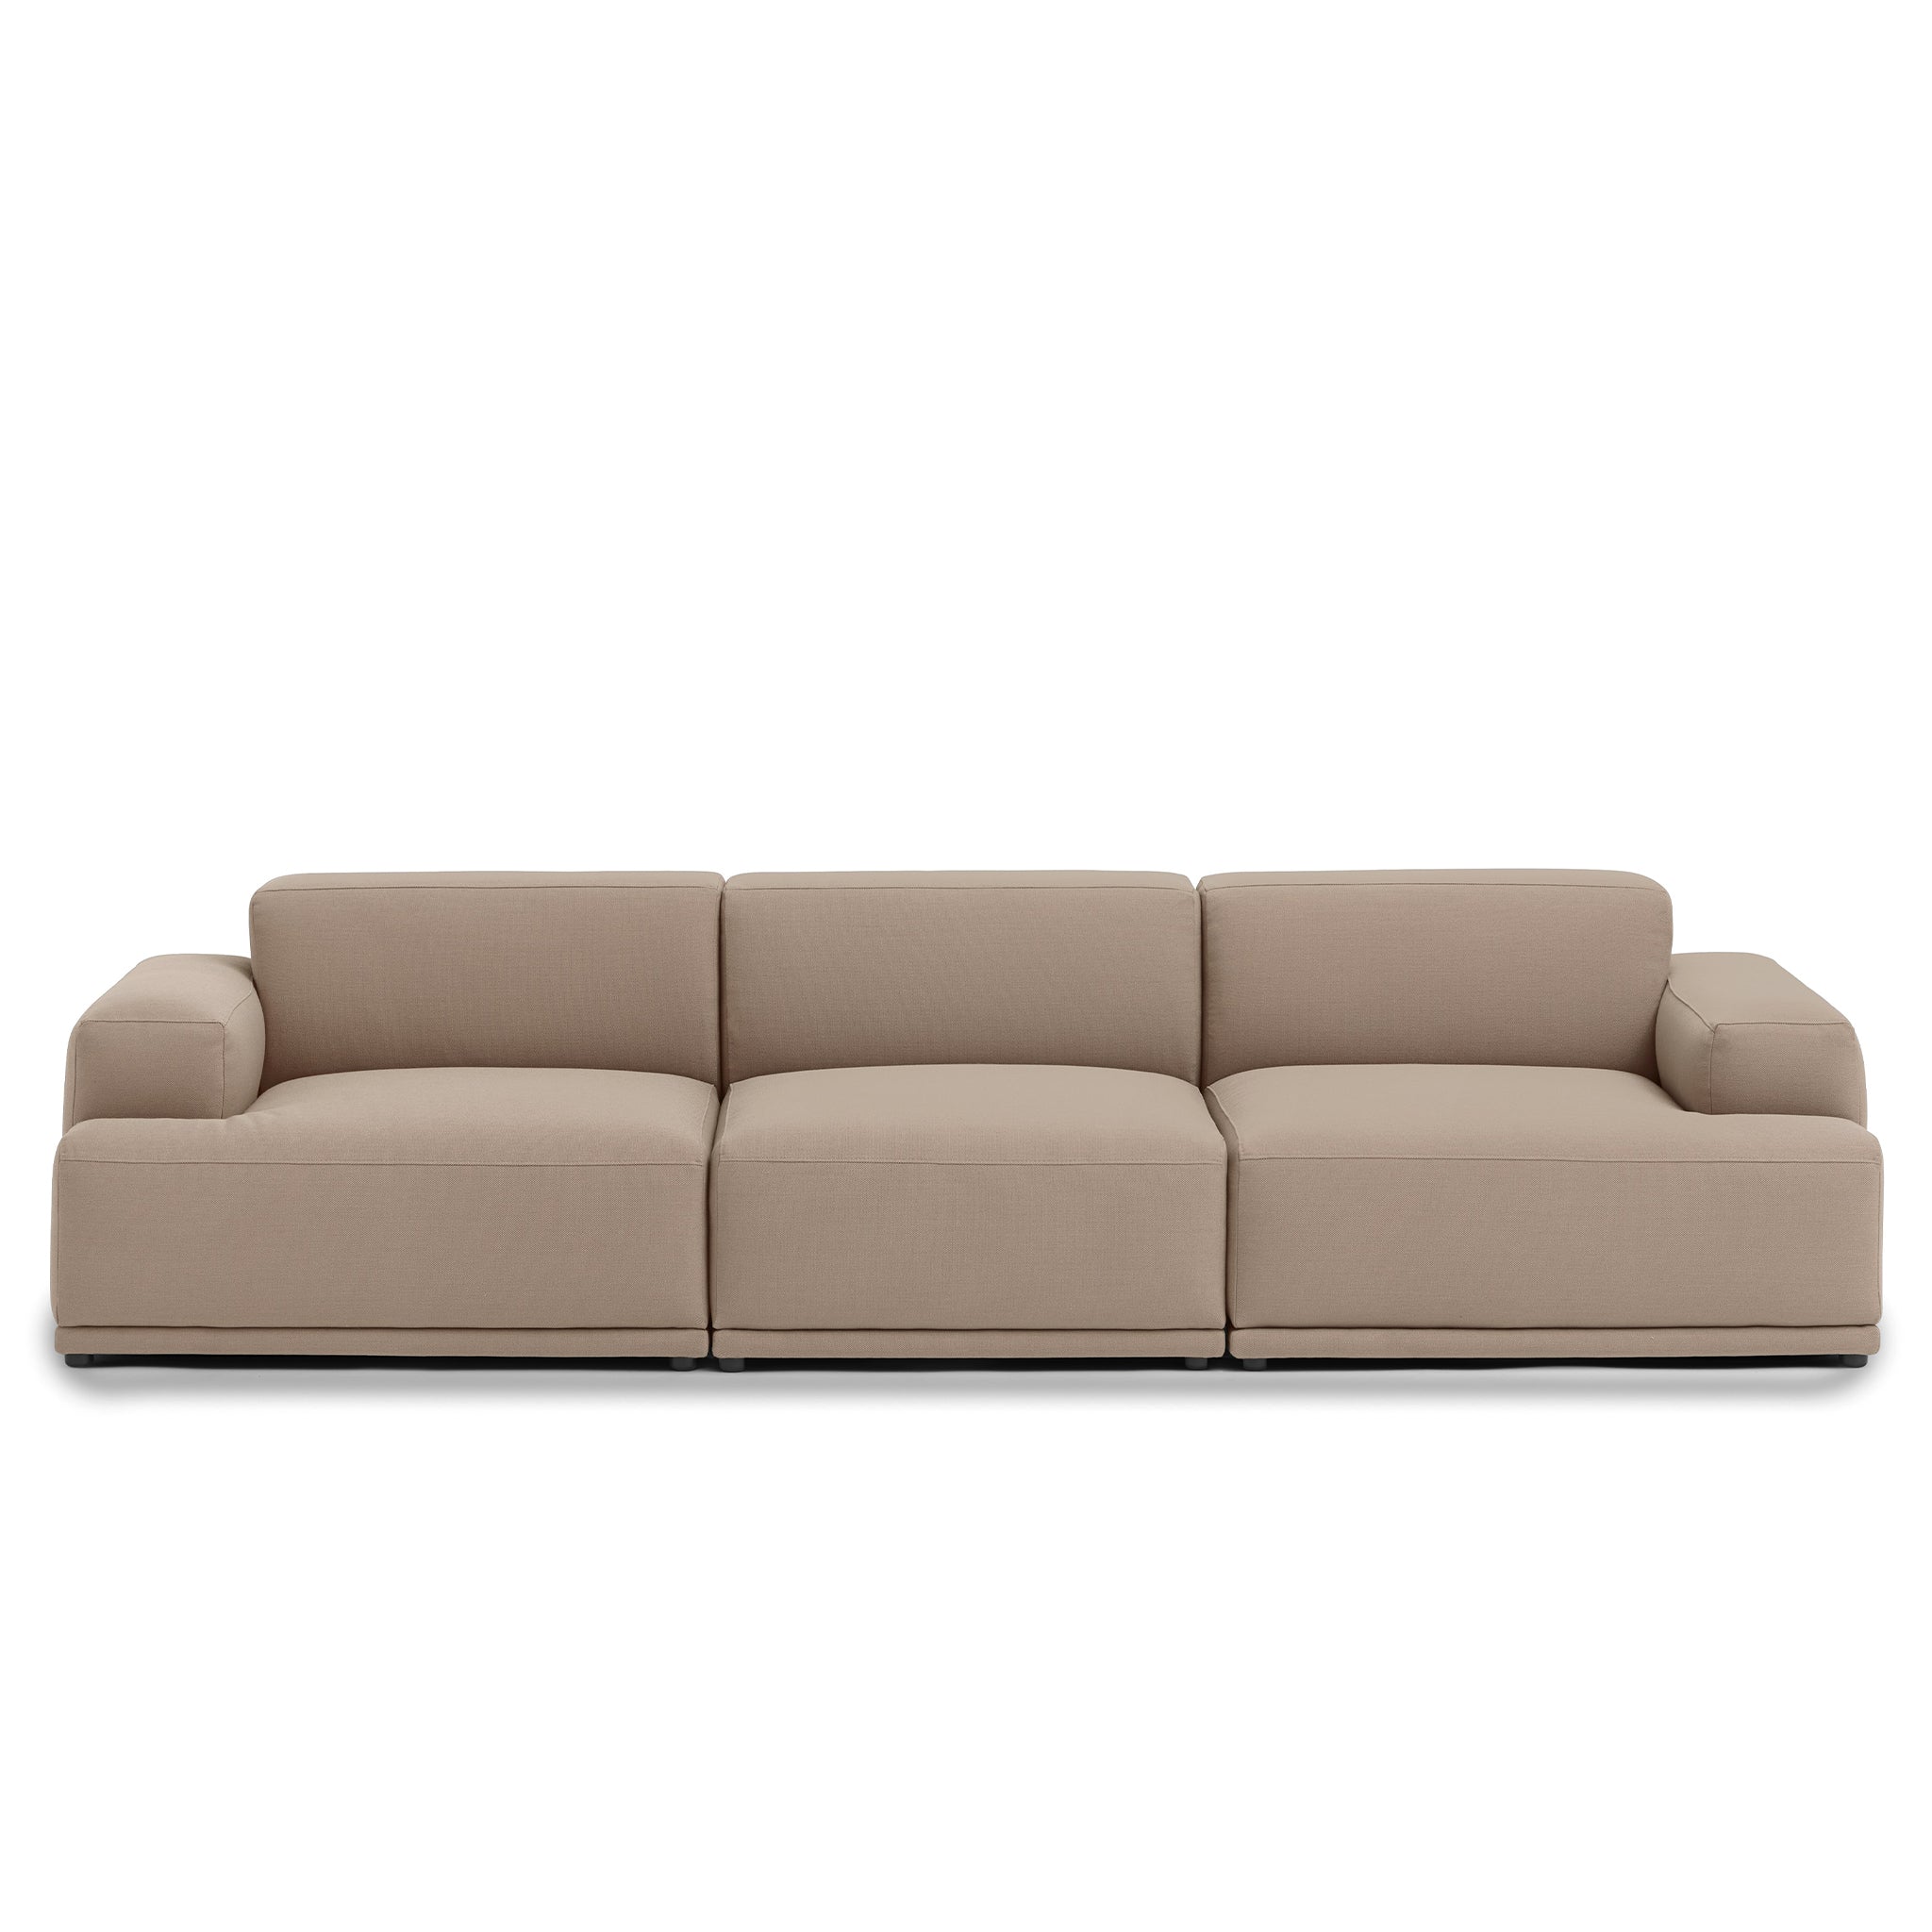 Connect Soft Sofa by Muuto